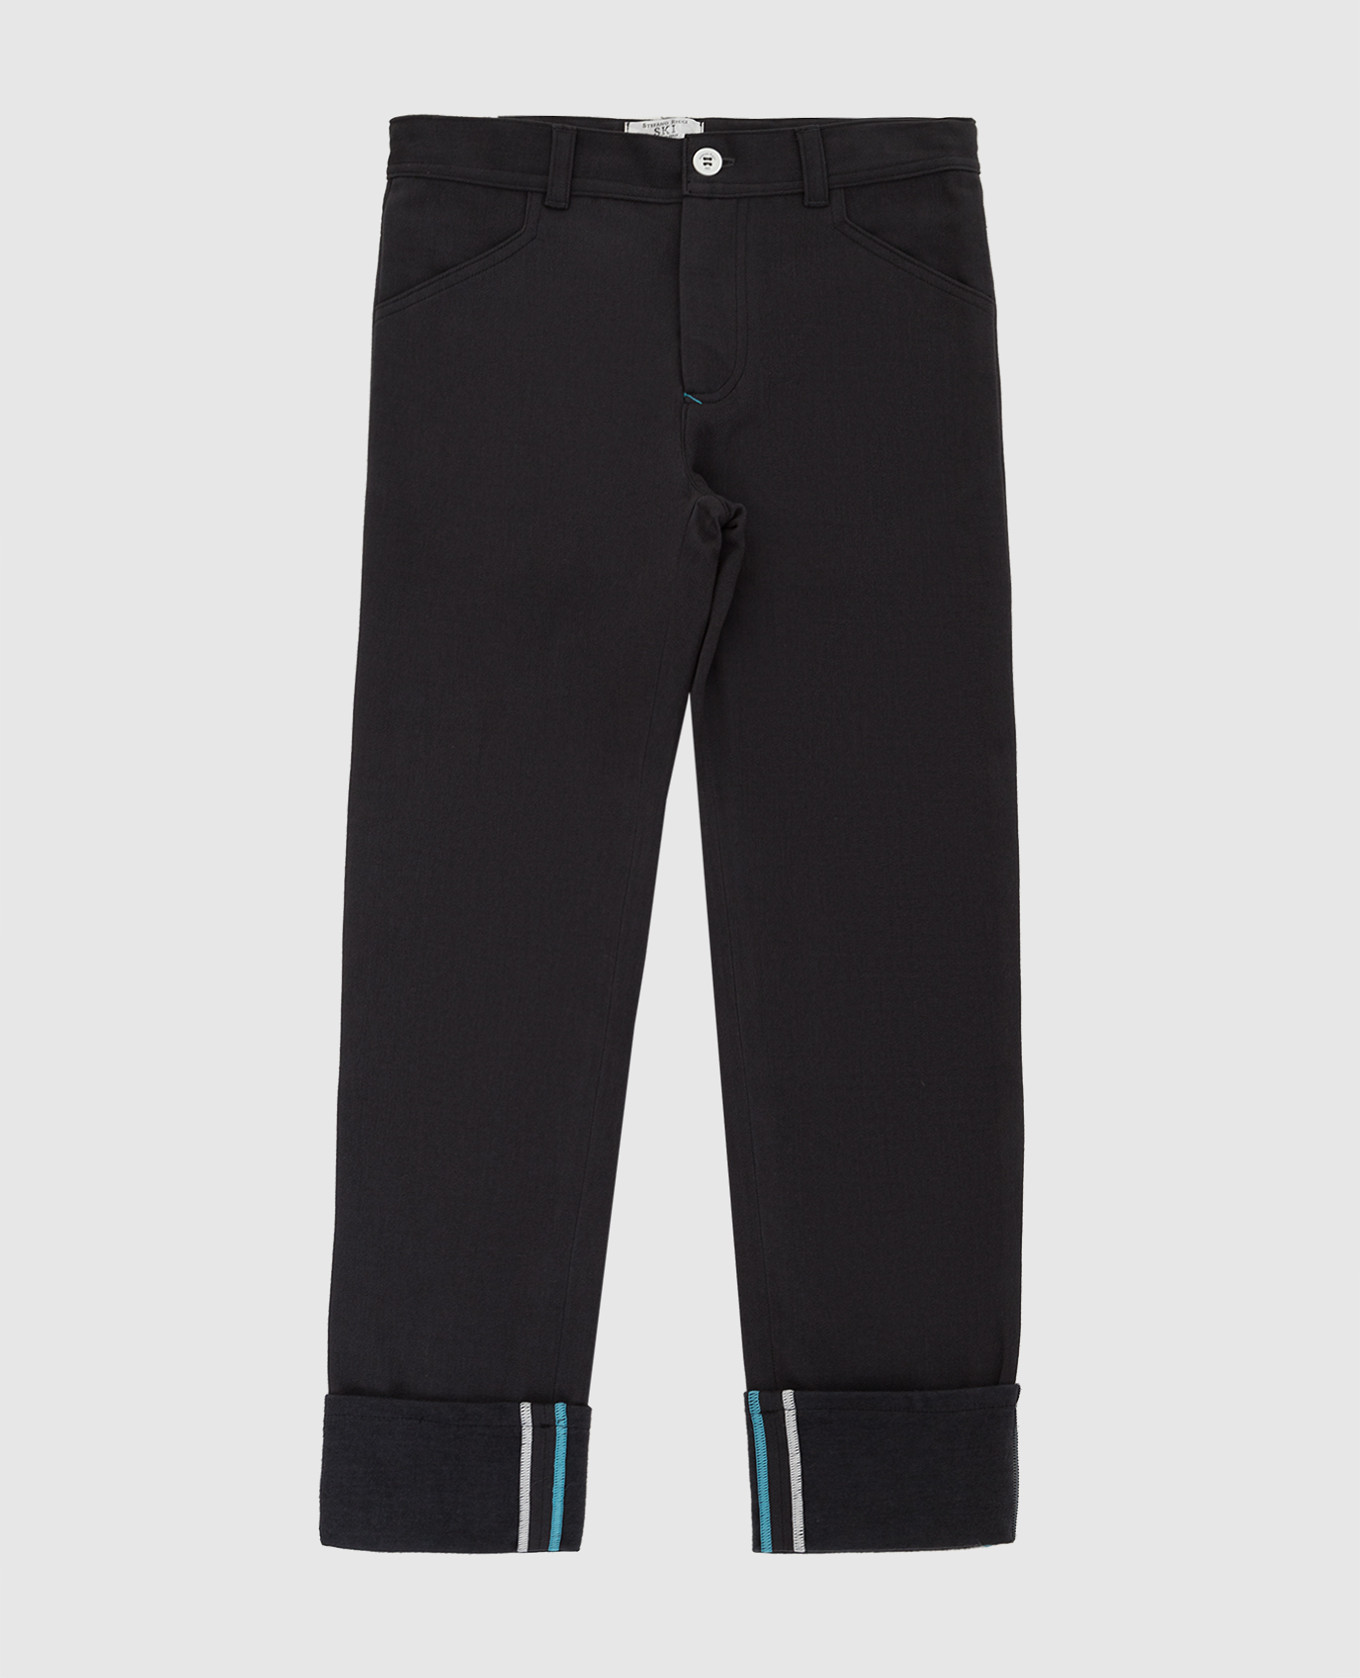 Children's dark gray trousers with embroidery